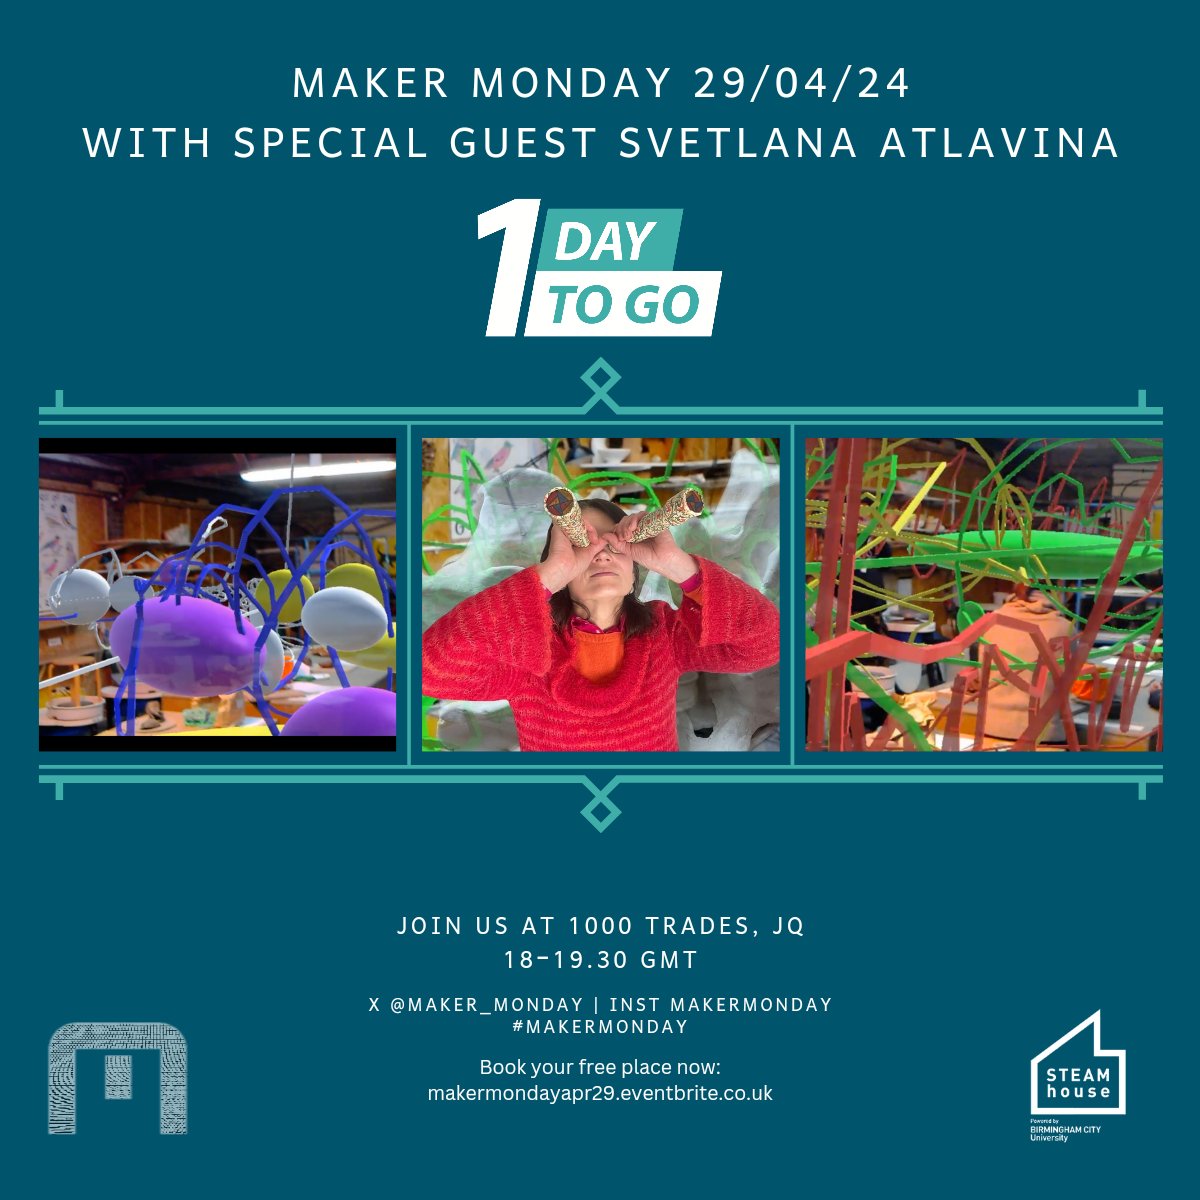 Hello #BrumHour. Tomorrow. Join us from 6pm for @maker_monday at the legendary @1000tradesjq. Join us on 29/04 from 6pm with special guest @satlavina #clay #ar #memories #childhood. Book - makermondayapr29.eventbrite.co.uk @steamhouseuk @myjq @bcugraduateplus